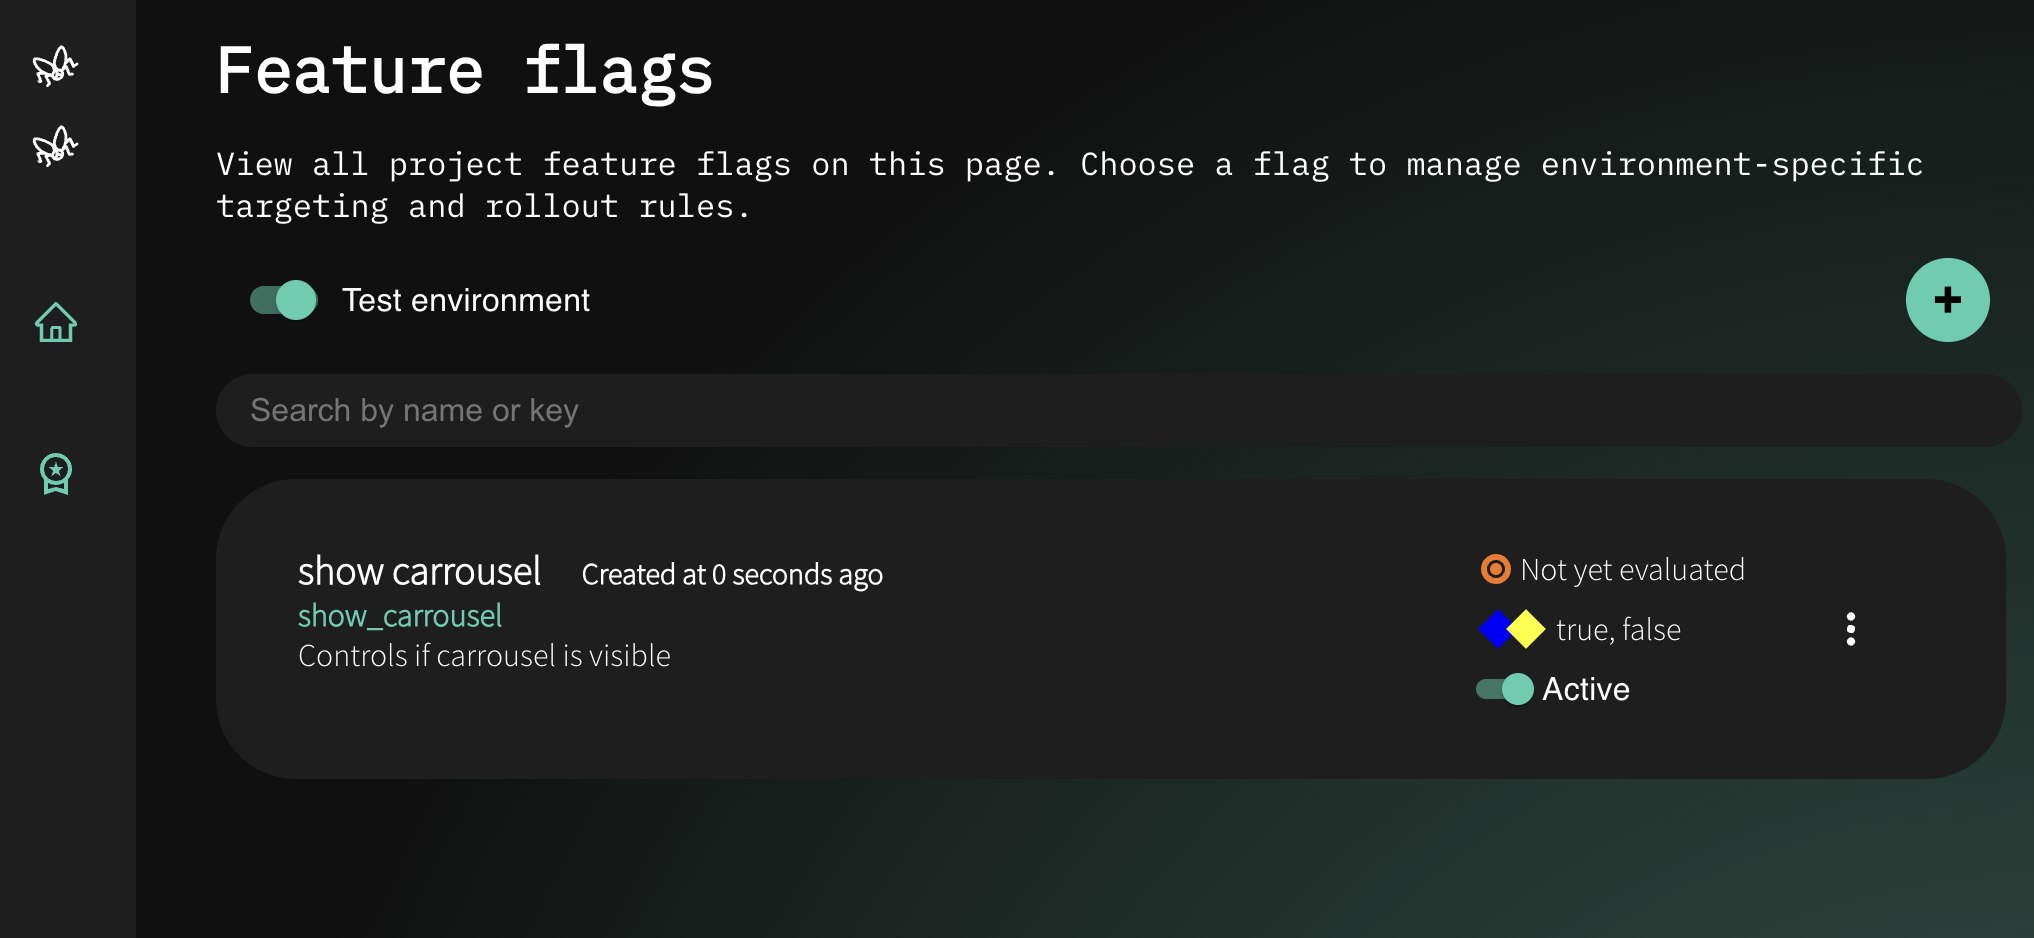 Feature Flag Management: Control, Test, and Deploy with Confidence